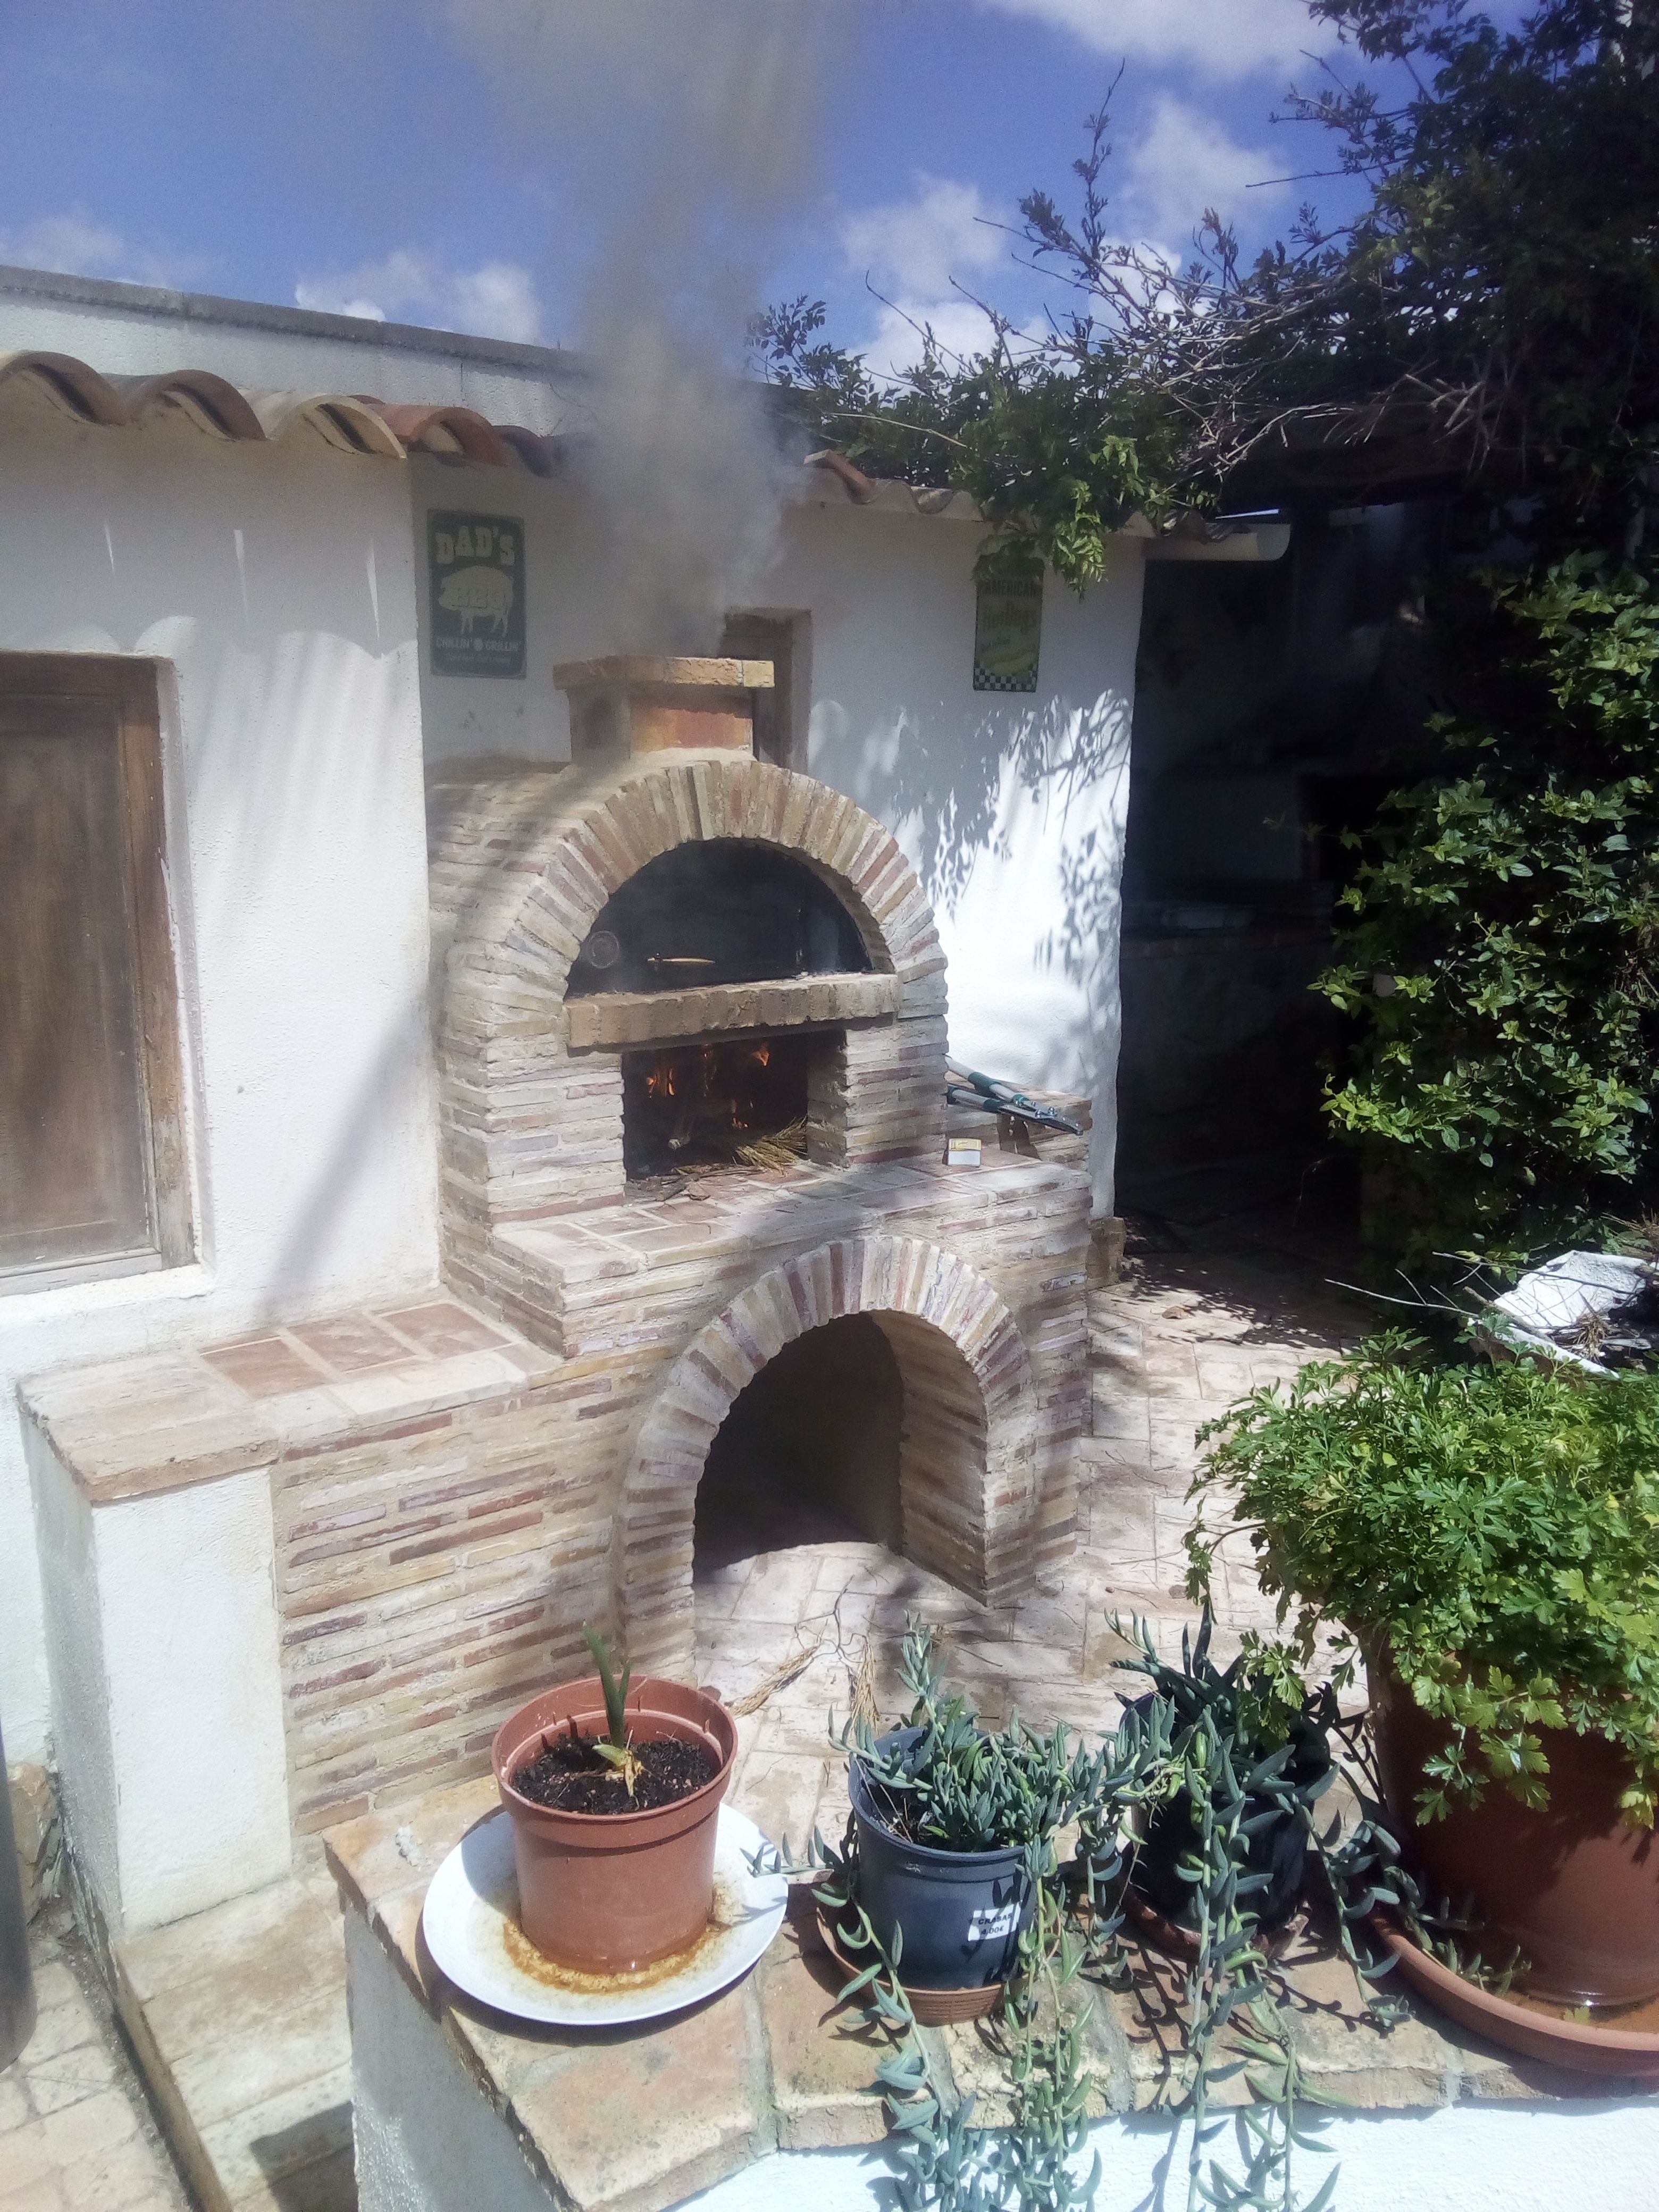 How to Properly Clean Your Wood-Fired Oven